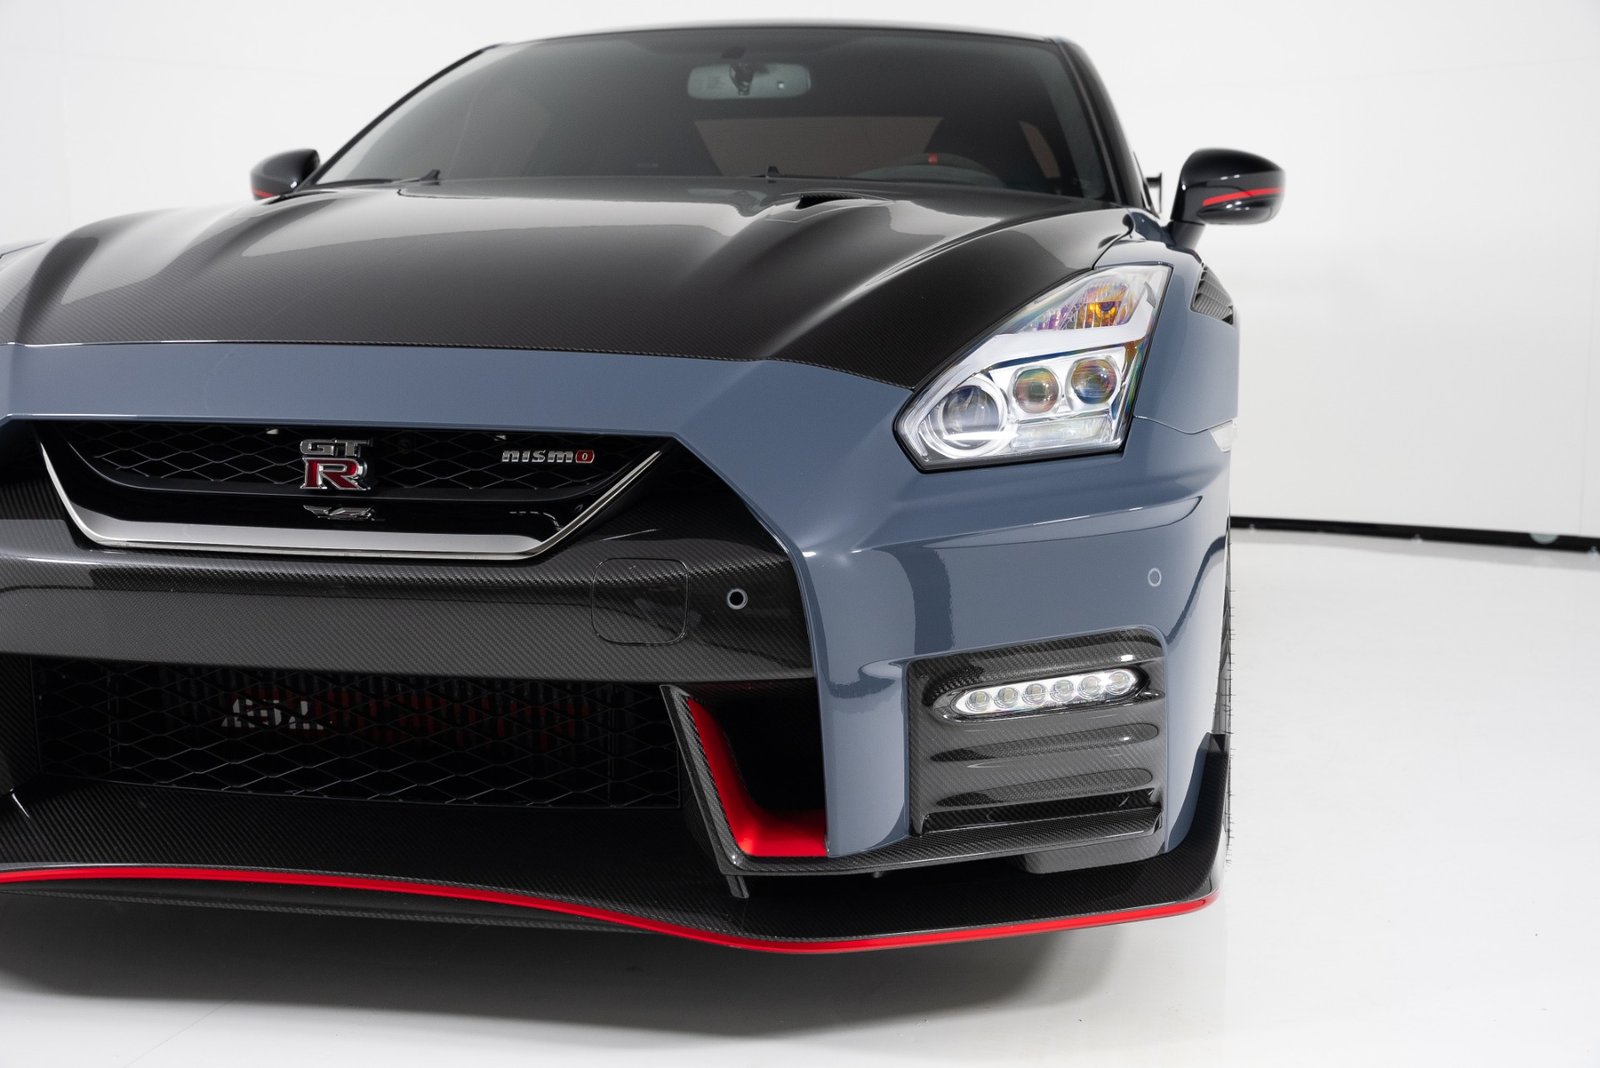 New 2021 NISSAN GT-R NISMO SPECIAL EDITION (29)